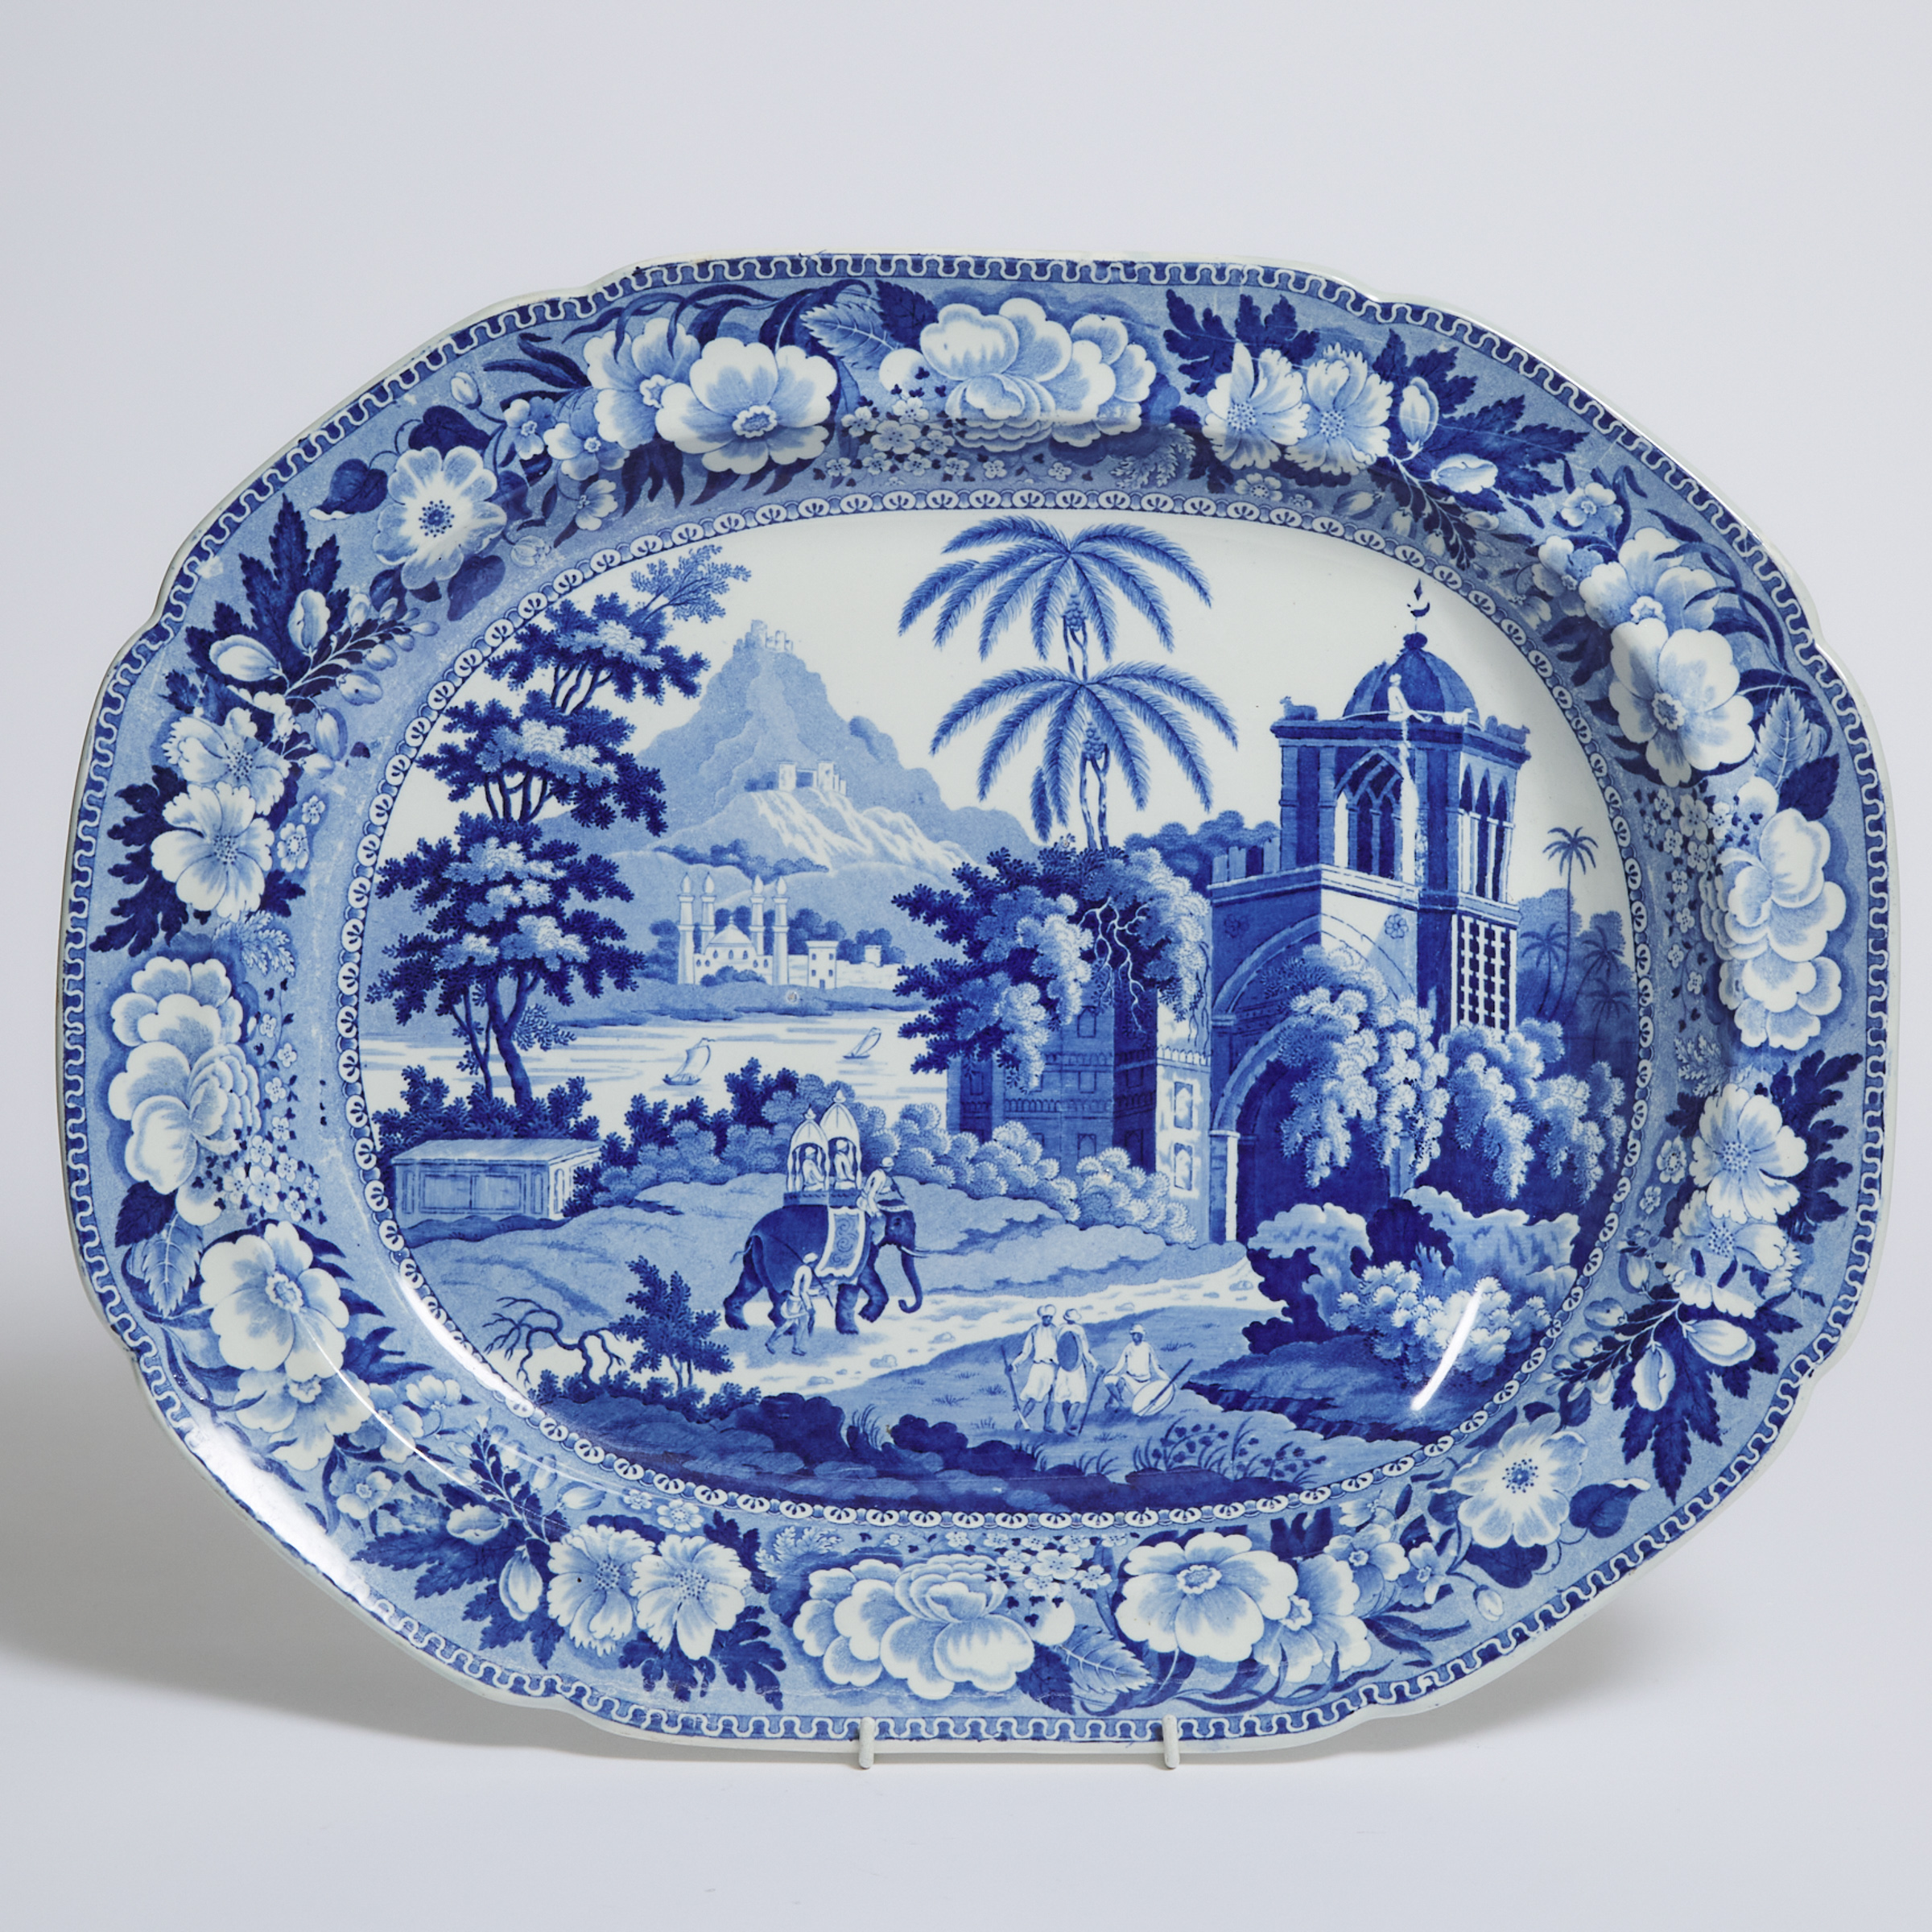 Herculaneum 'View in the Fort, Madura' Blue Printed Oval Meat Platter, c.1820